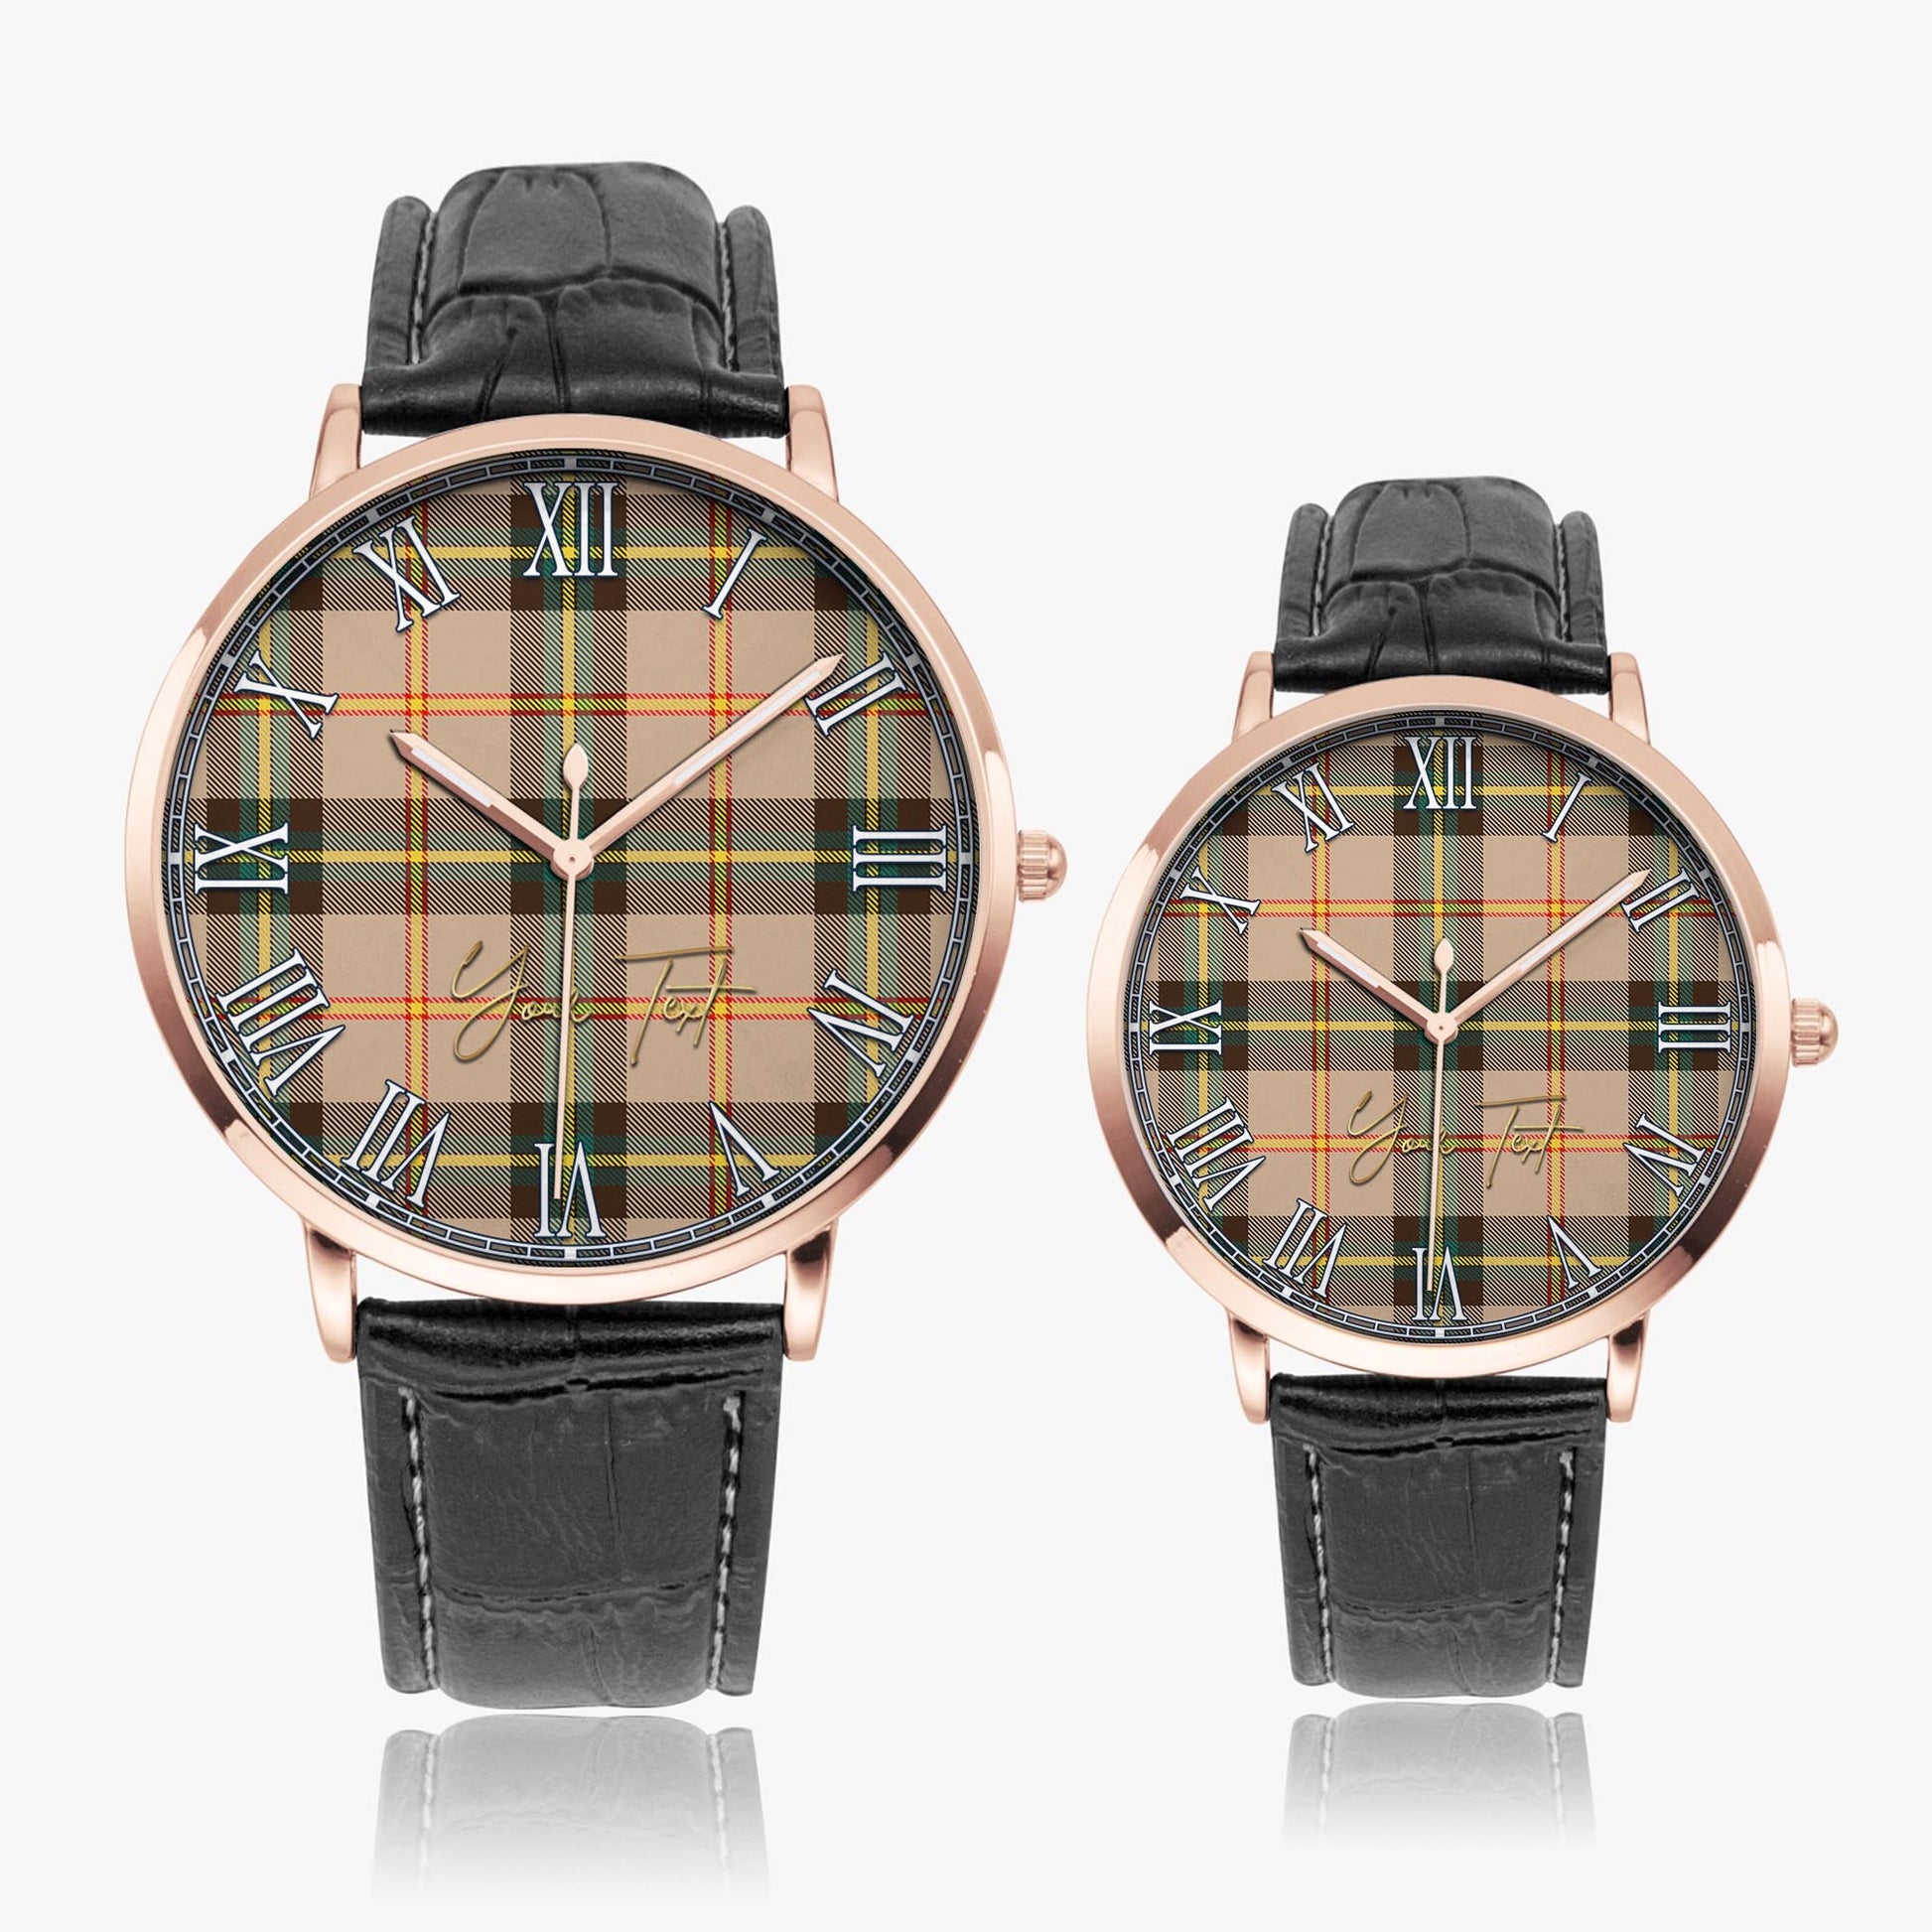 Saskatchewan Province Canada Tartan Personalized Your Text Leather Trap Quartz Watch Ultra Thin Rose Gold Case With Black Leather Strap - Tartanvibesclothing